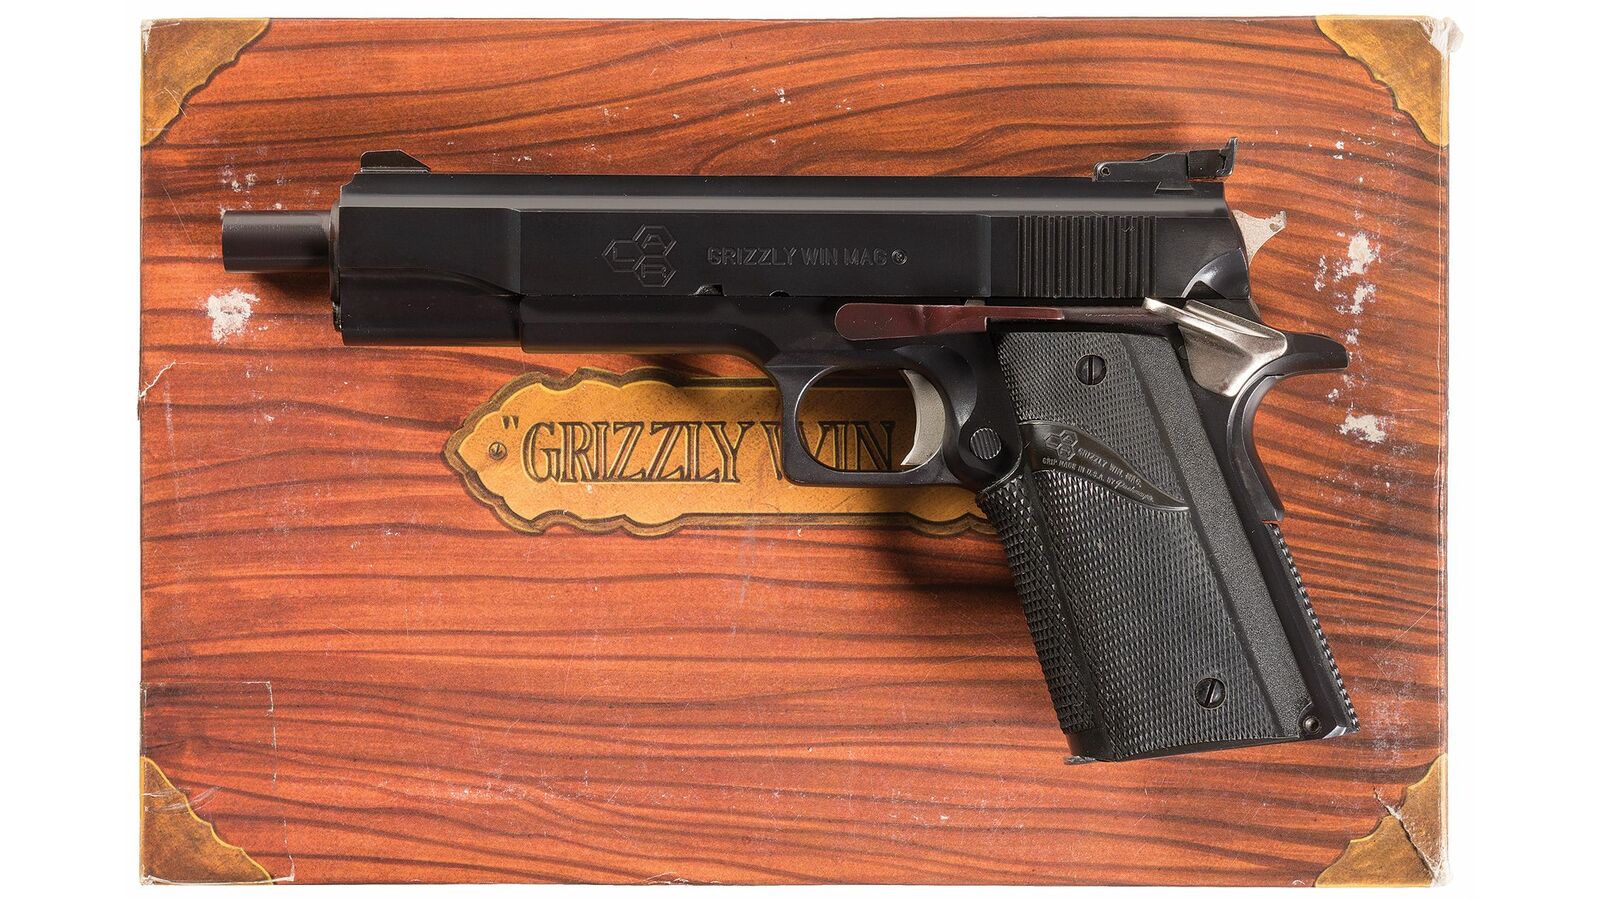 Lar Mfg Co - Grizzly Win Mag | Rock Island Auction